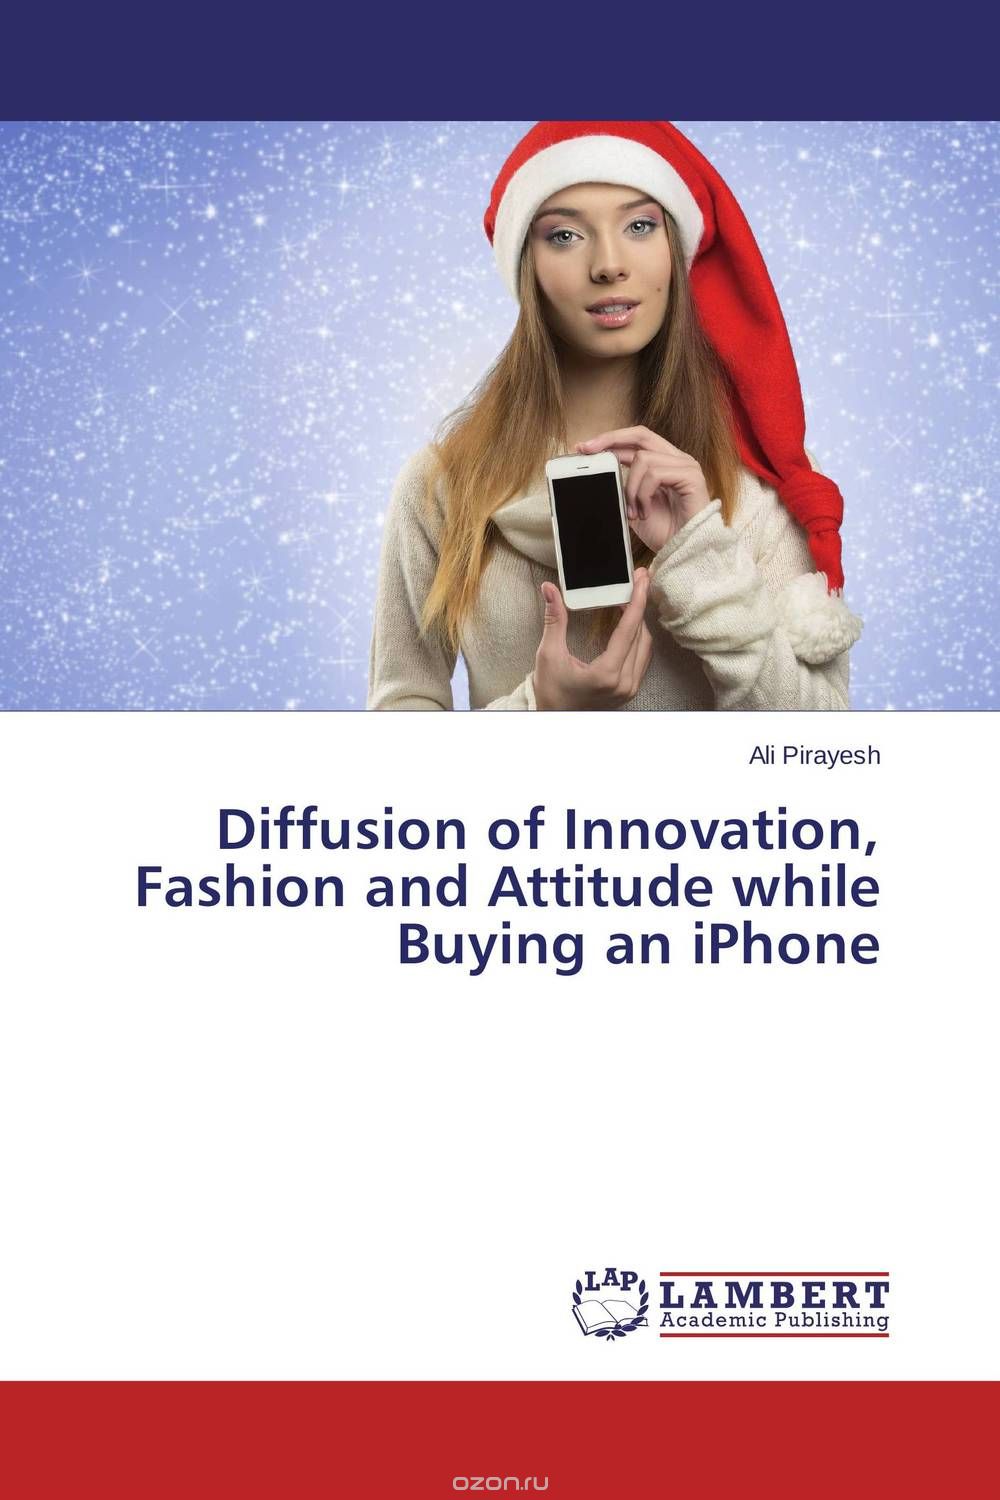 Diffusion of Innovation, Fashion and Attitude while Buying an iPhone